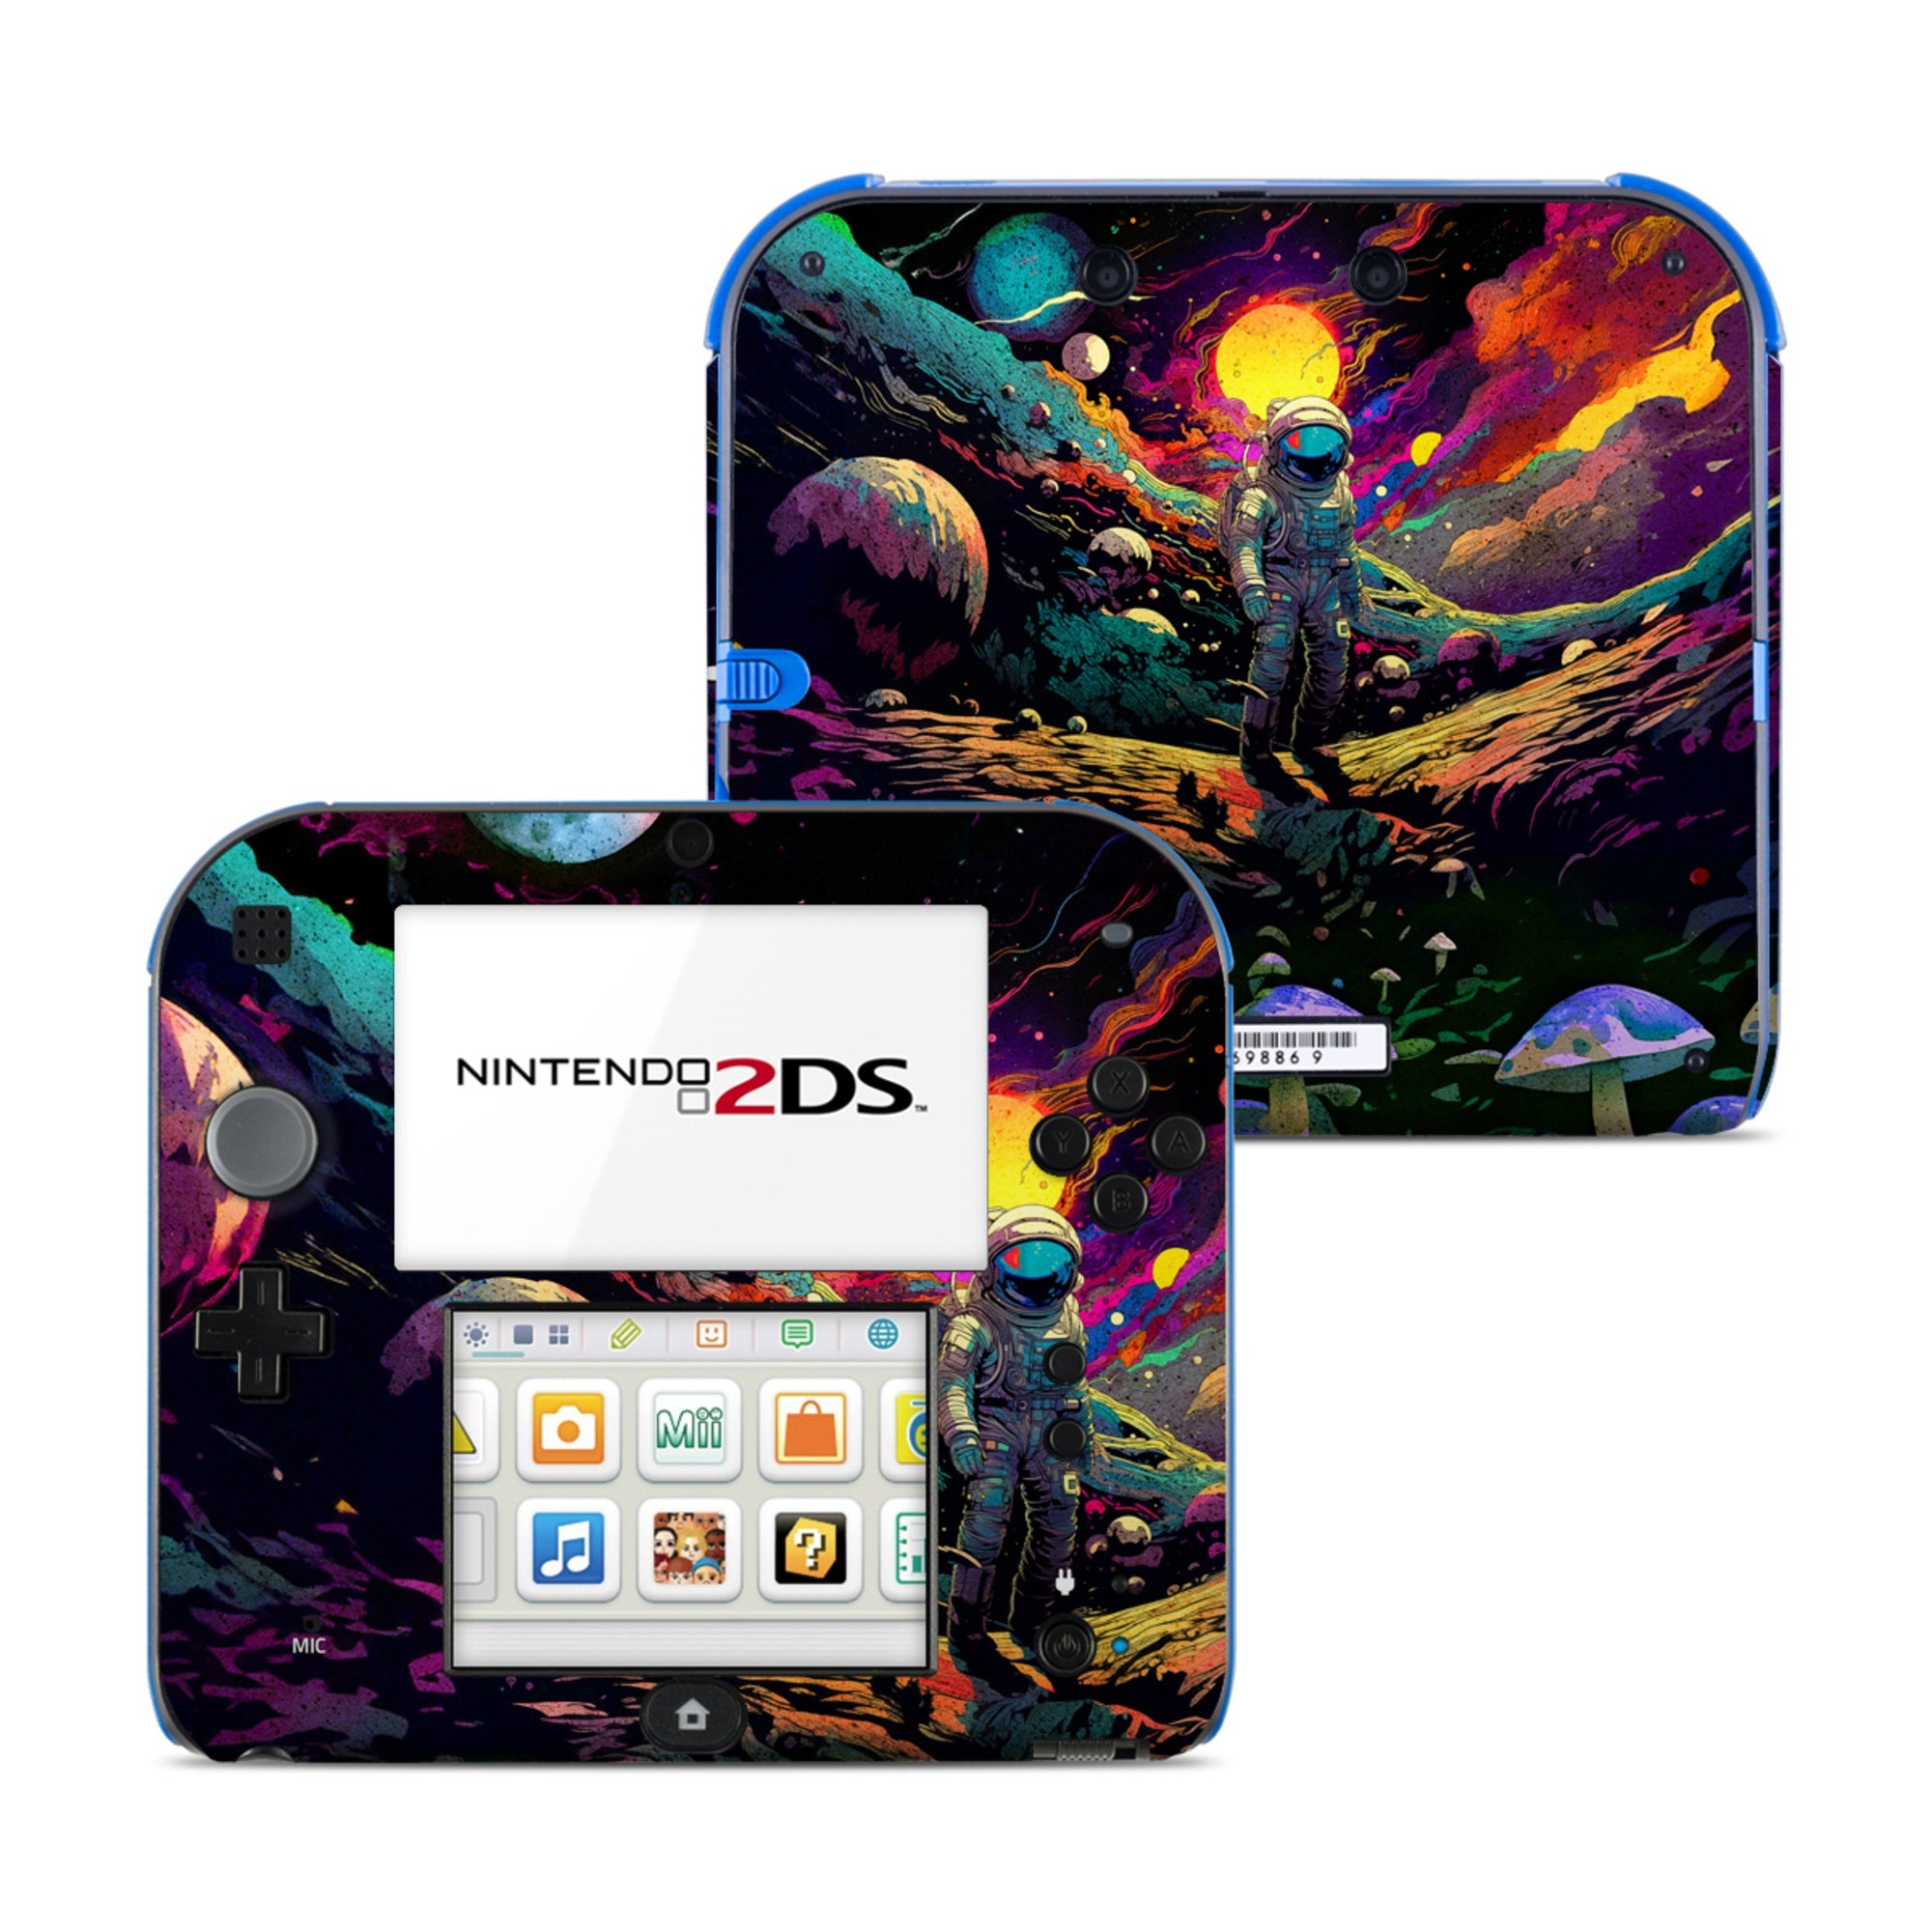 Trip to Space - Nintendo 2DS Skin